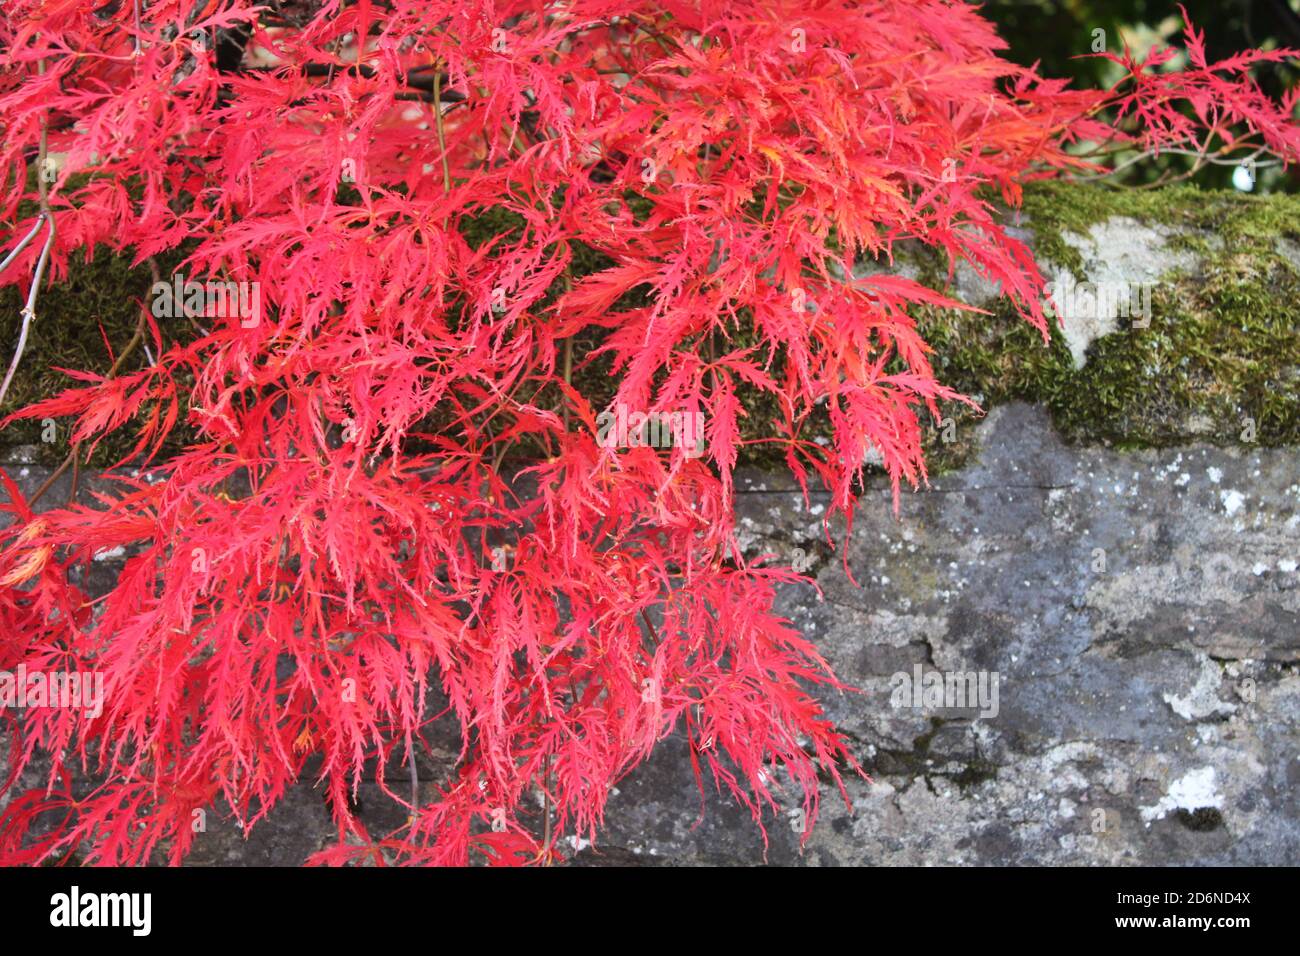 Bright red autumnal trees. Vibrant red autumn leaves growing from trees and shrubs. Stunning vibrant red acer growing in small garden. Autumn UK. Stock Photo